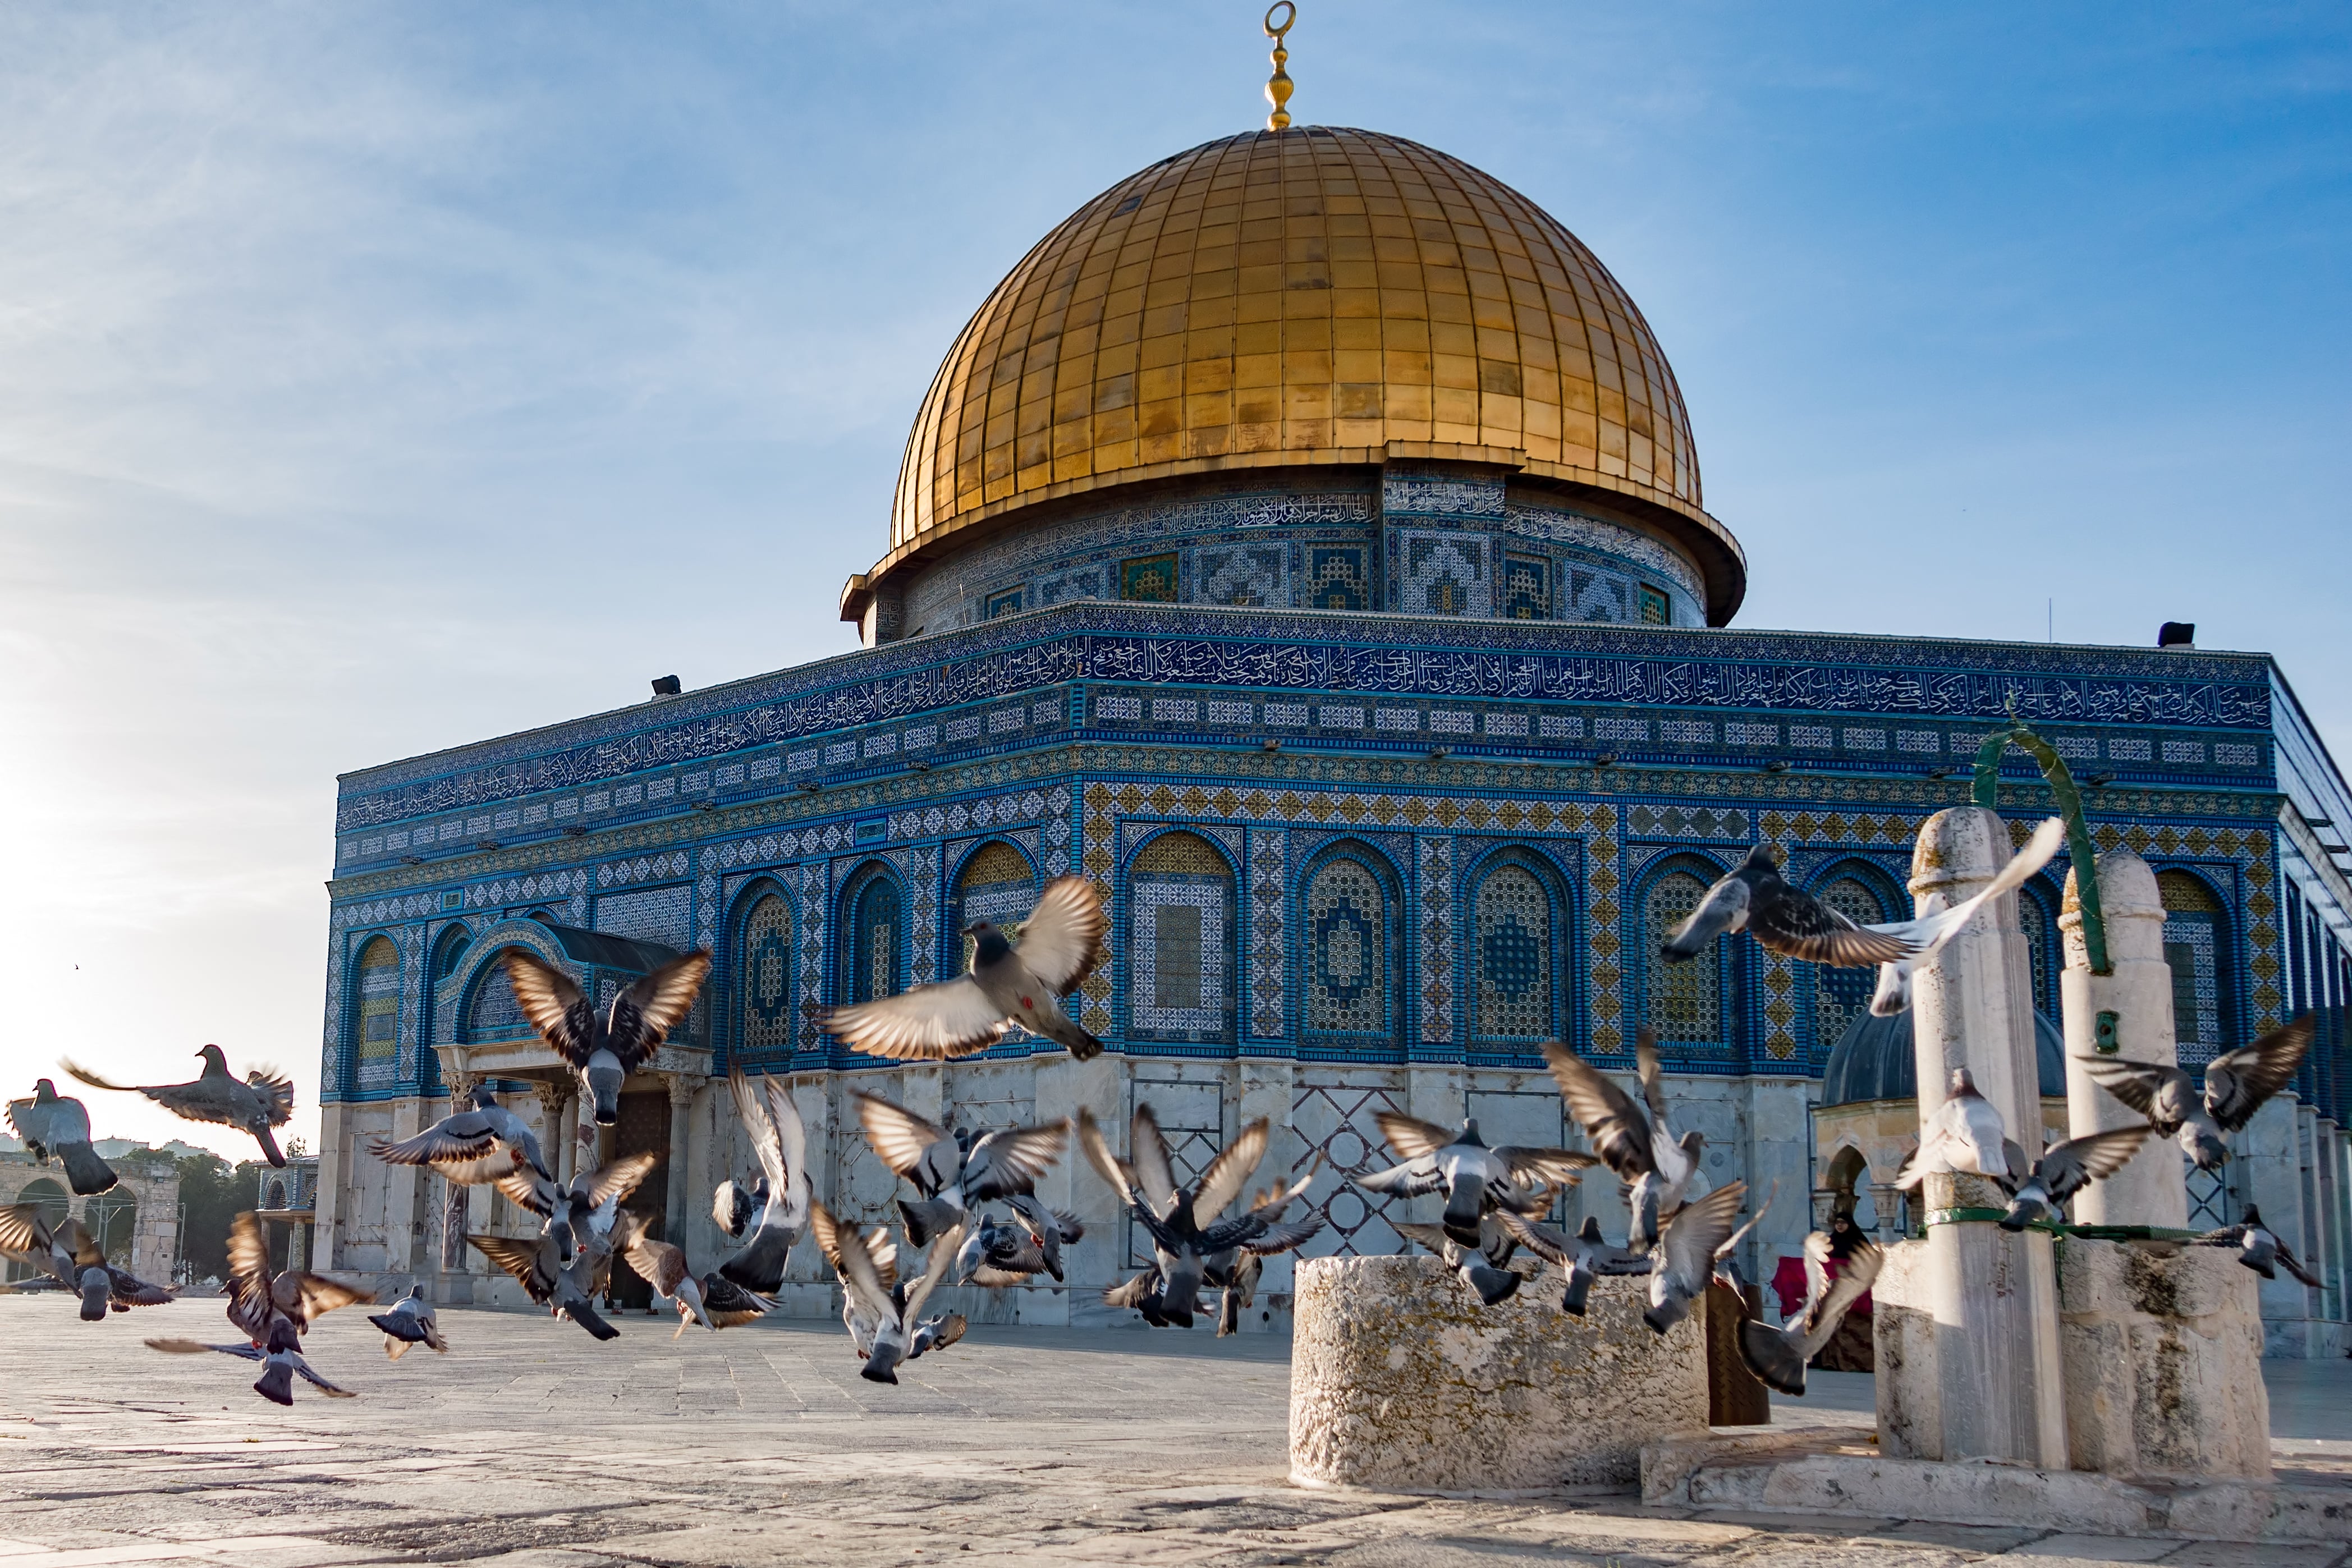 Jerusalem Private Tour - Dome of the Rock on the Temple Mount